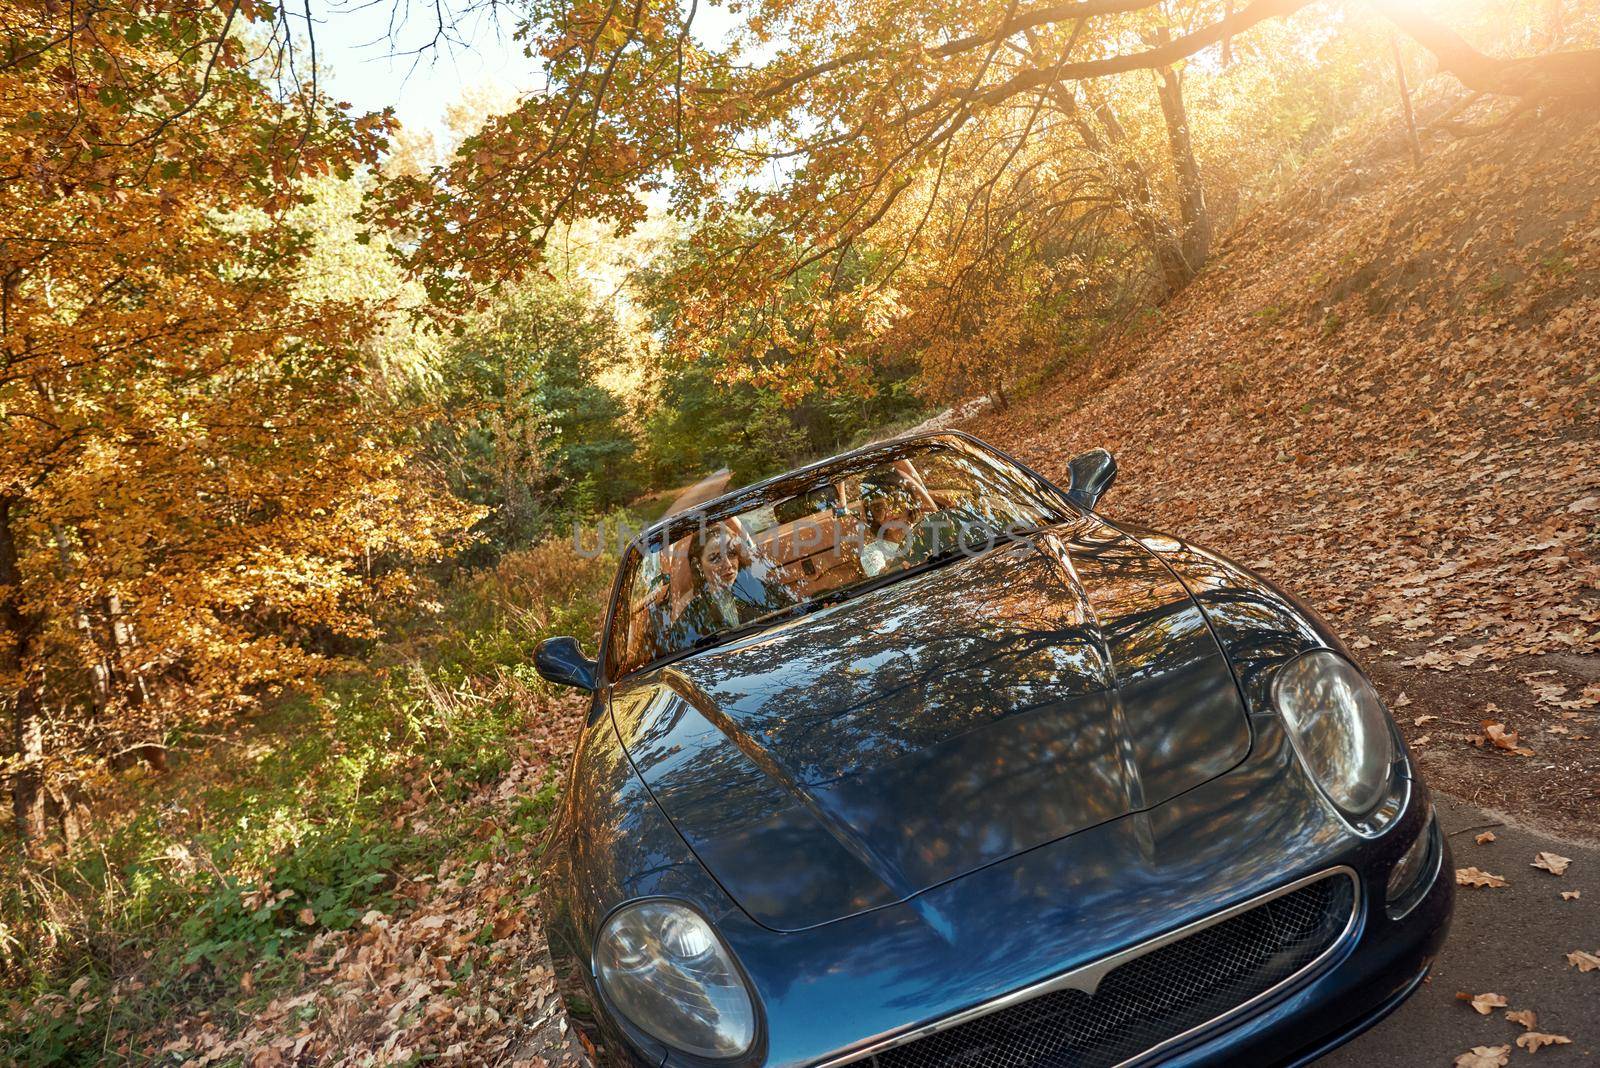 A black roofless car driving fast on the countryside asphalt road against morning sky with a beautiful sunrise. Autumn season, falling leaves